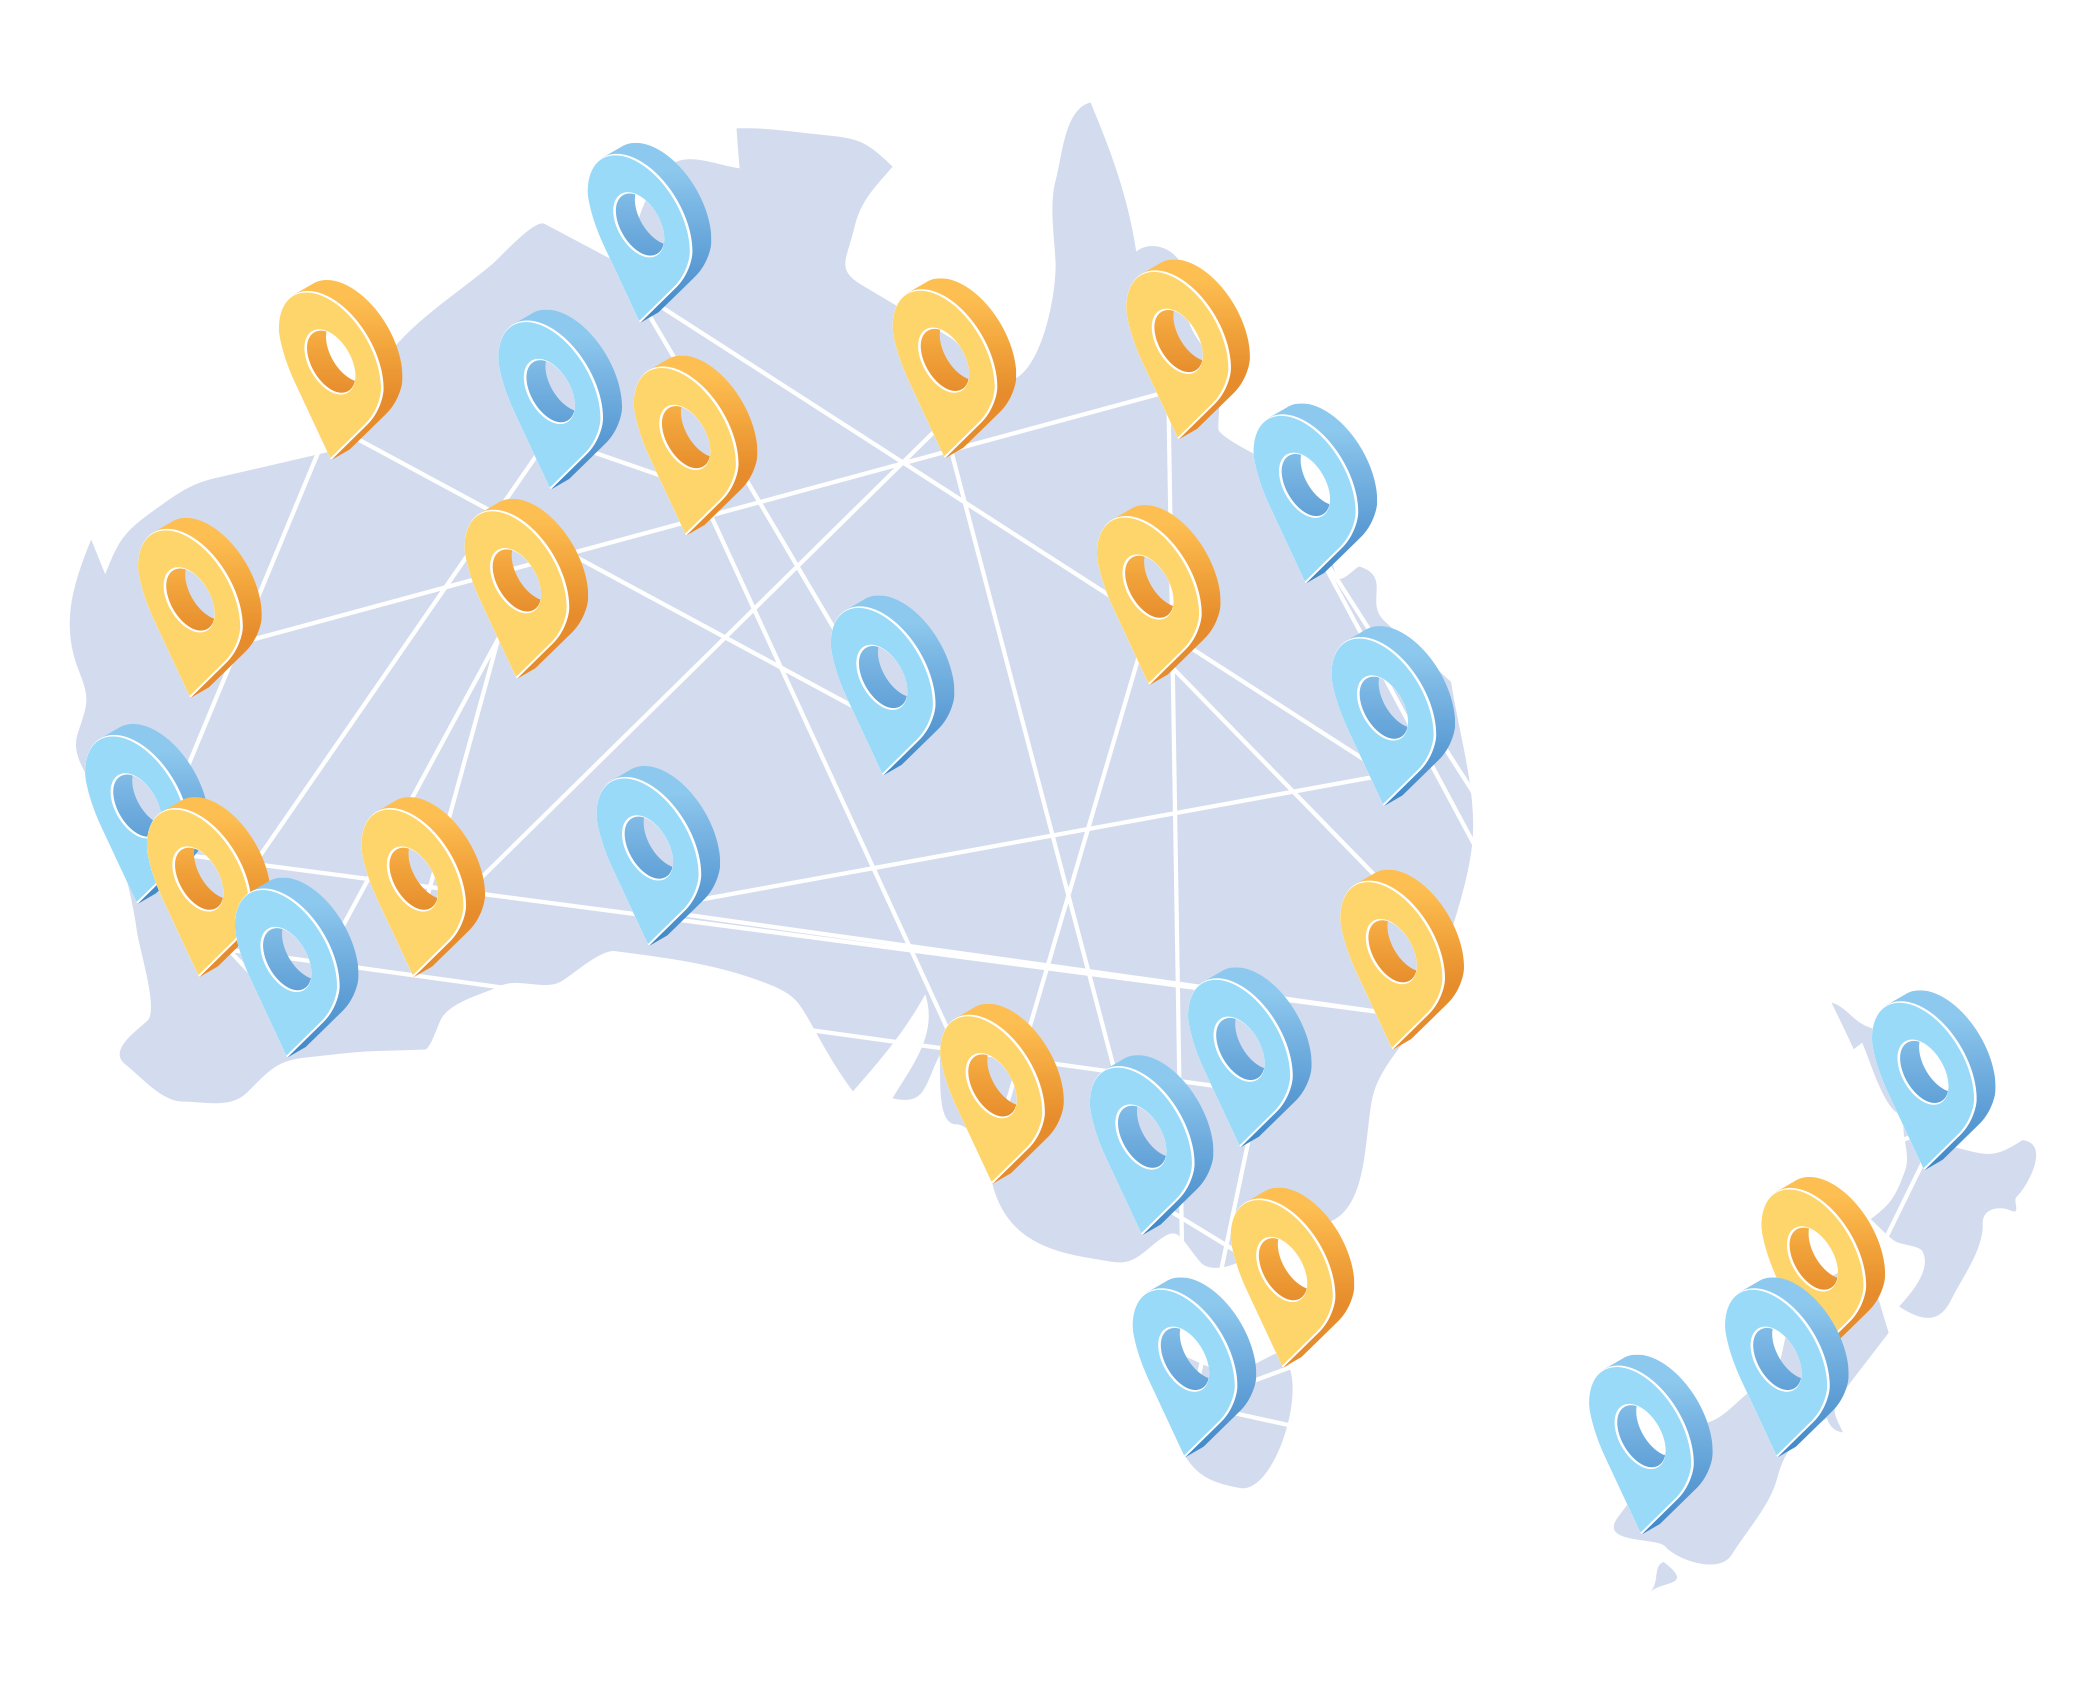 Pharmx - Our network spans Australia and New Zealand